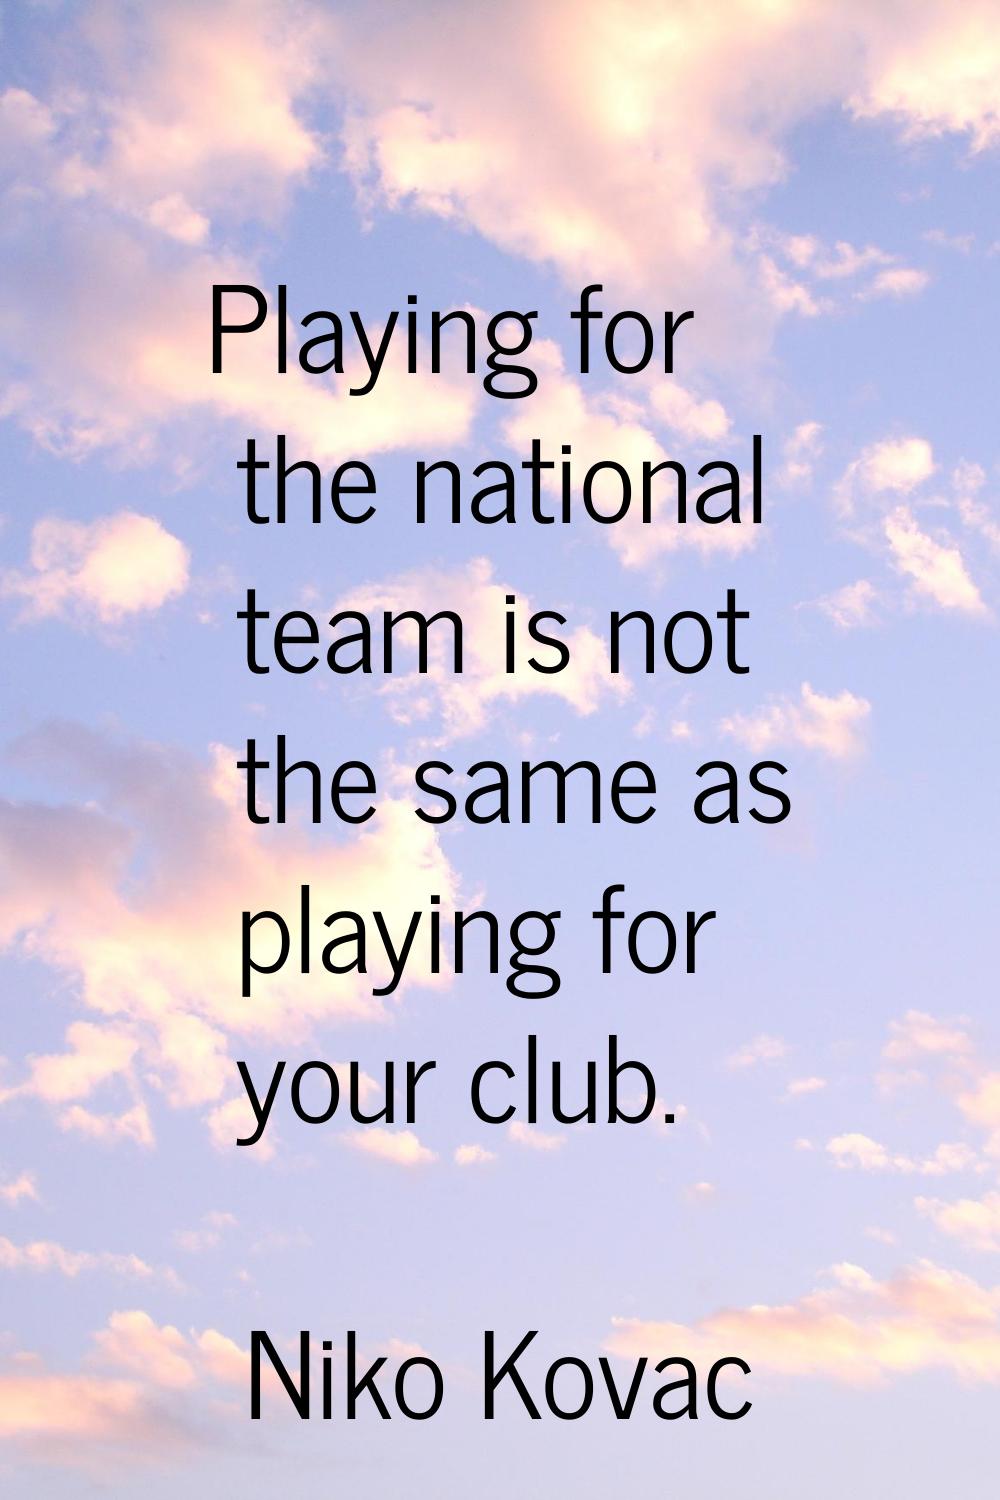 Playing for the national team is not the same as playing for your club.